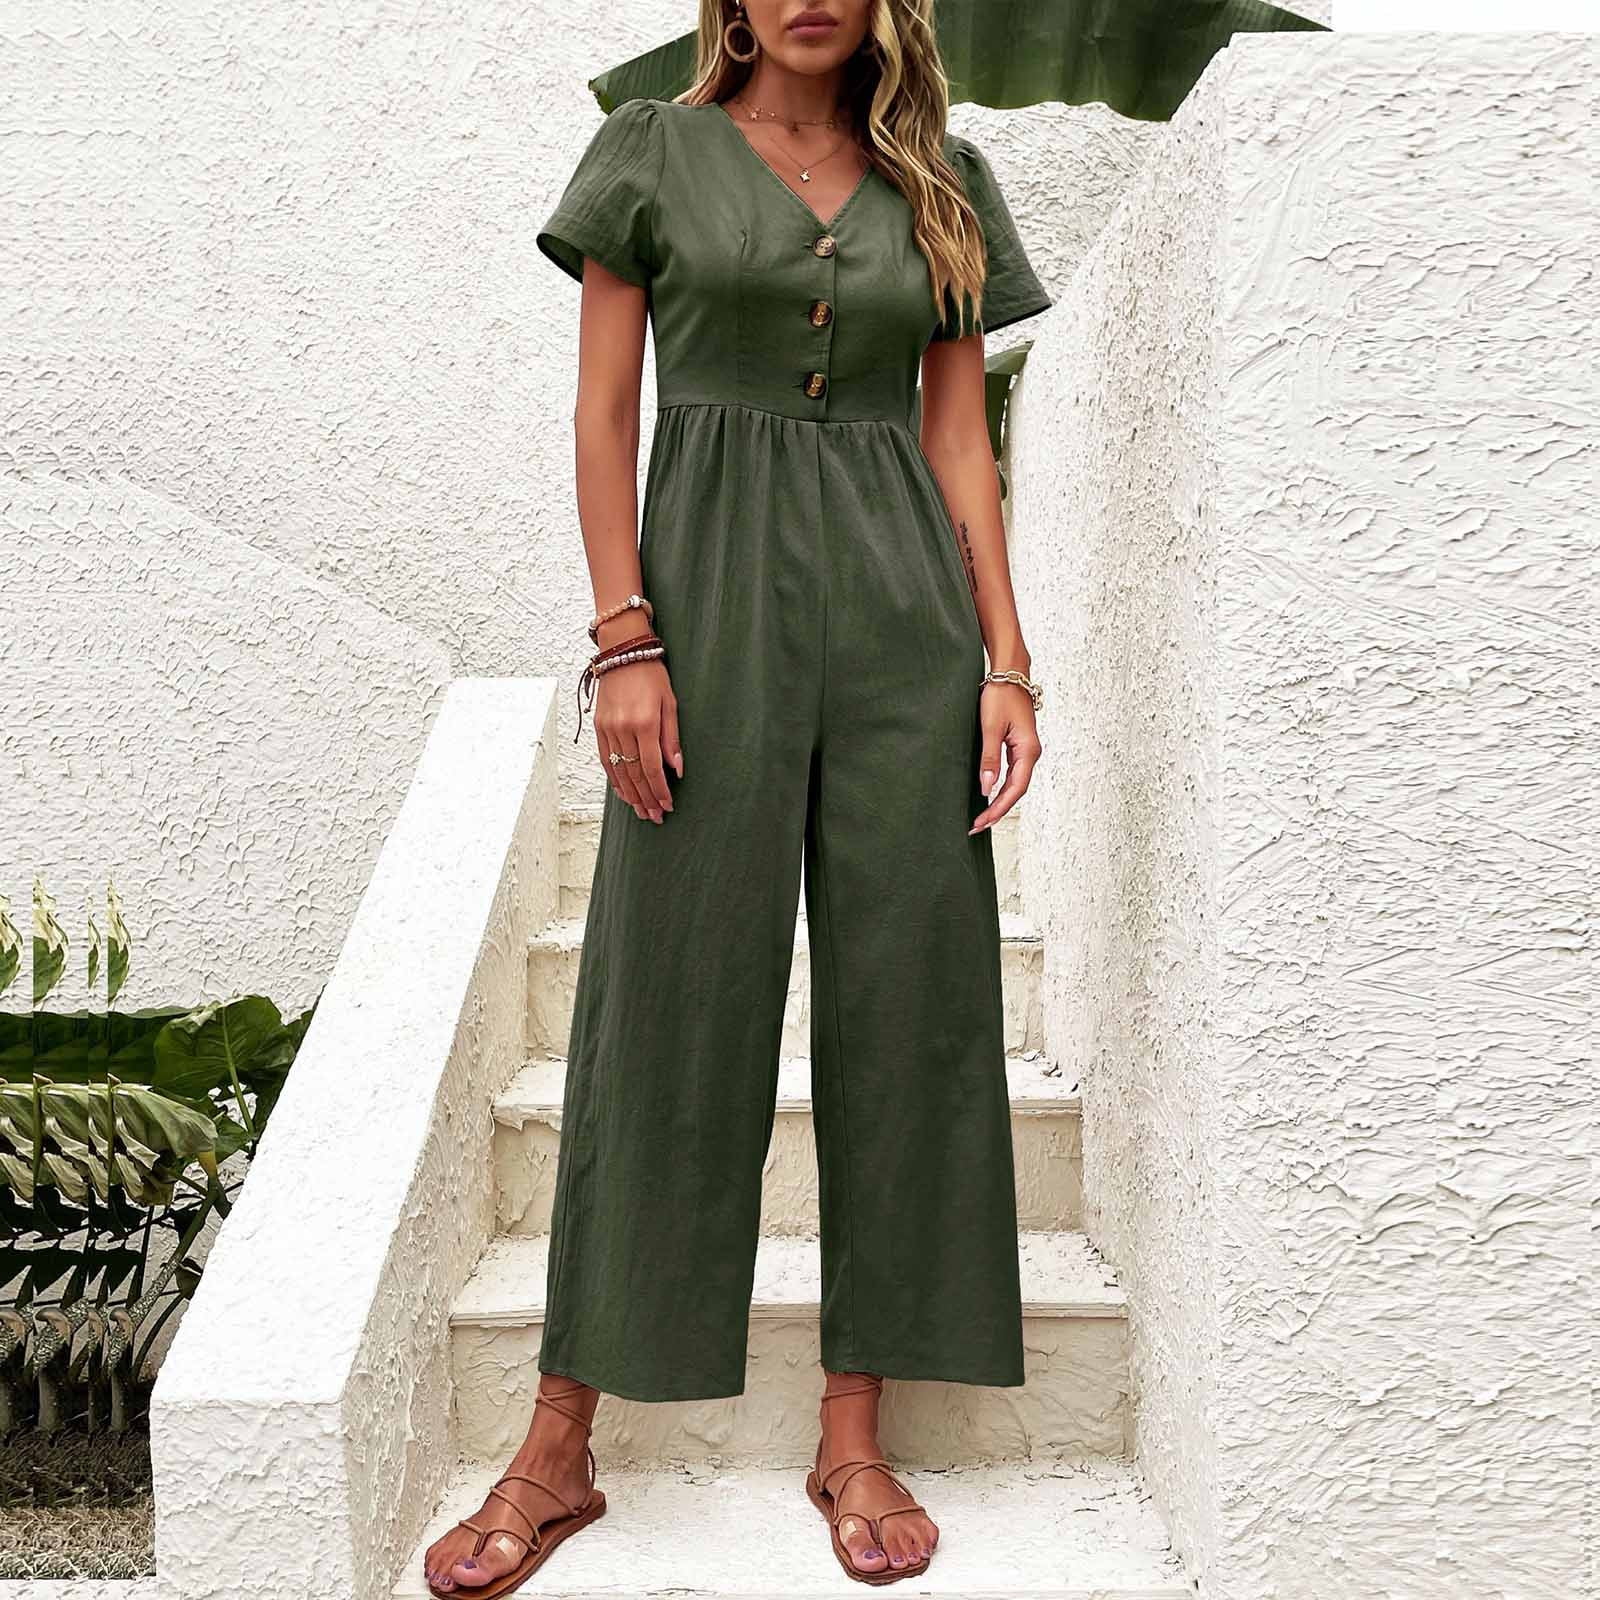 Tawop Fashion Women Summer Casual Sexy Short Sleeve Solid Color Pants ...